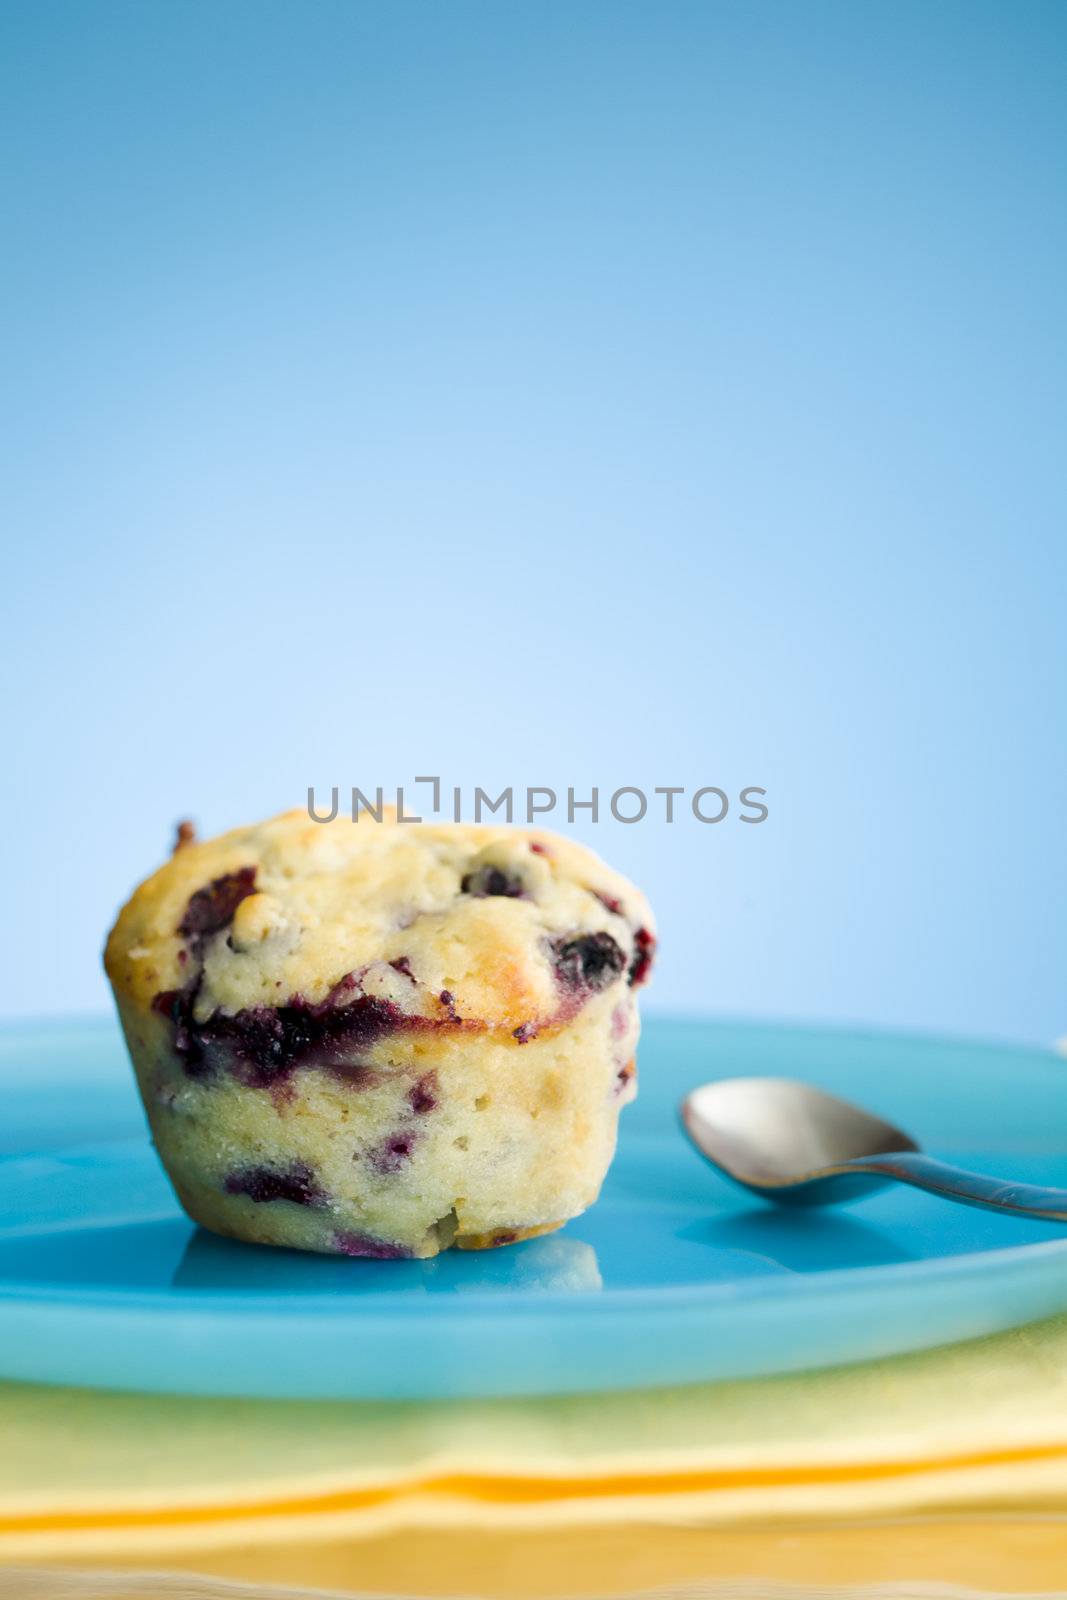 Muffin and blue plate by mjp